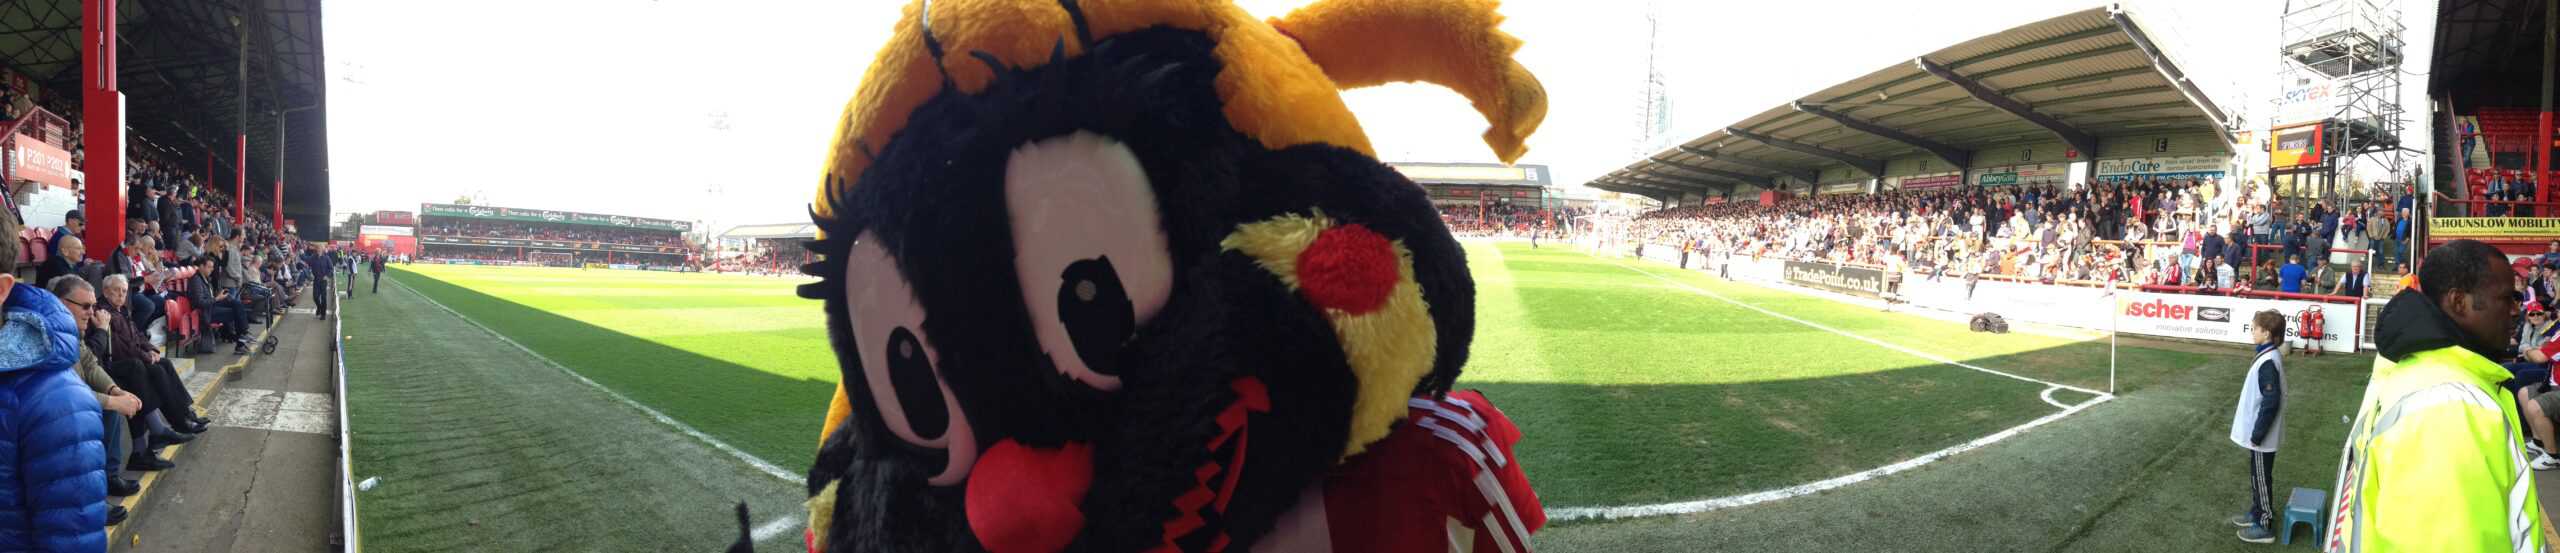 Bees Refuse To Be Cut Down By Forest – Brentford 2 NFFC 2 (VIDEO)